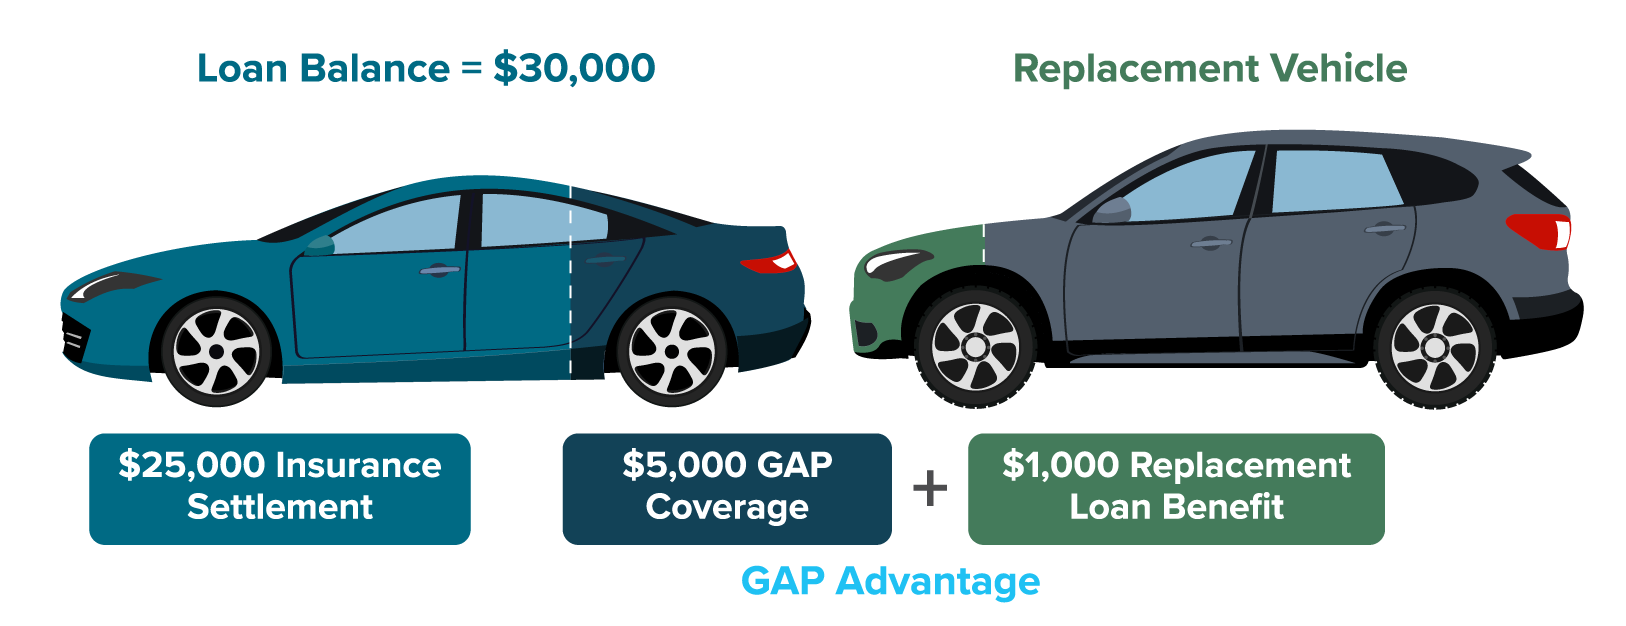 Illustration with two cars showing the benefit of having a GAP Advantage